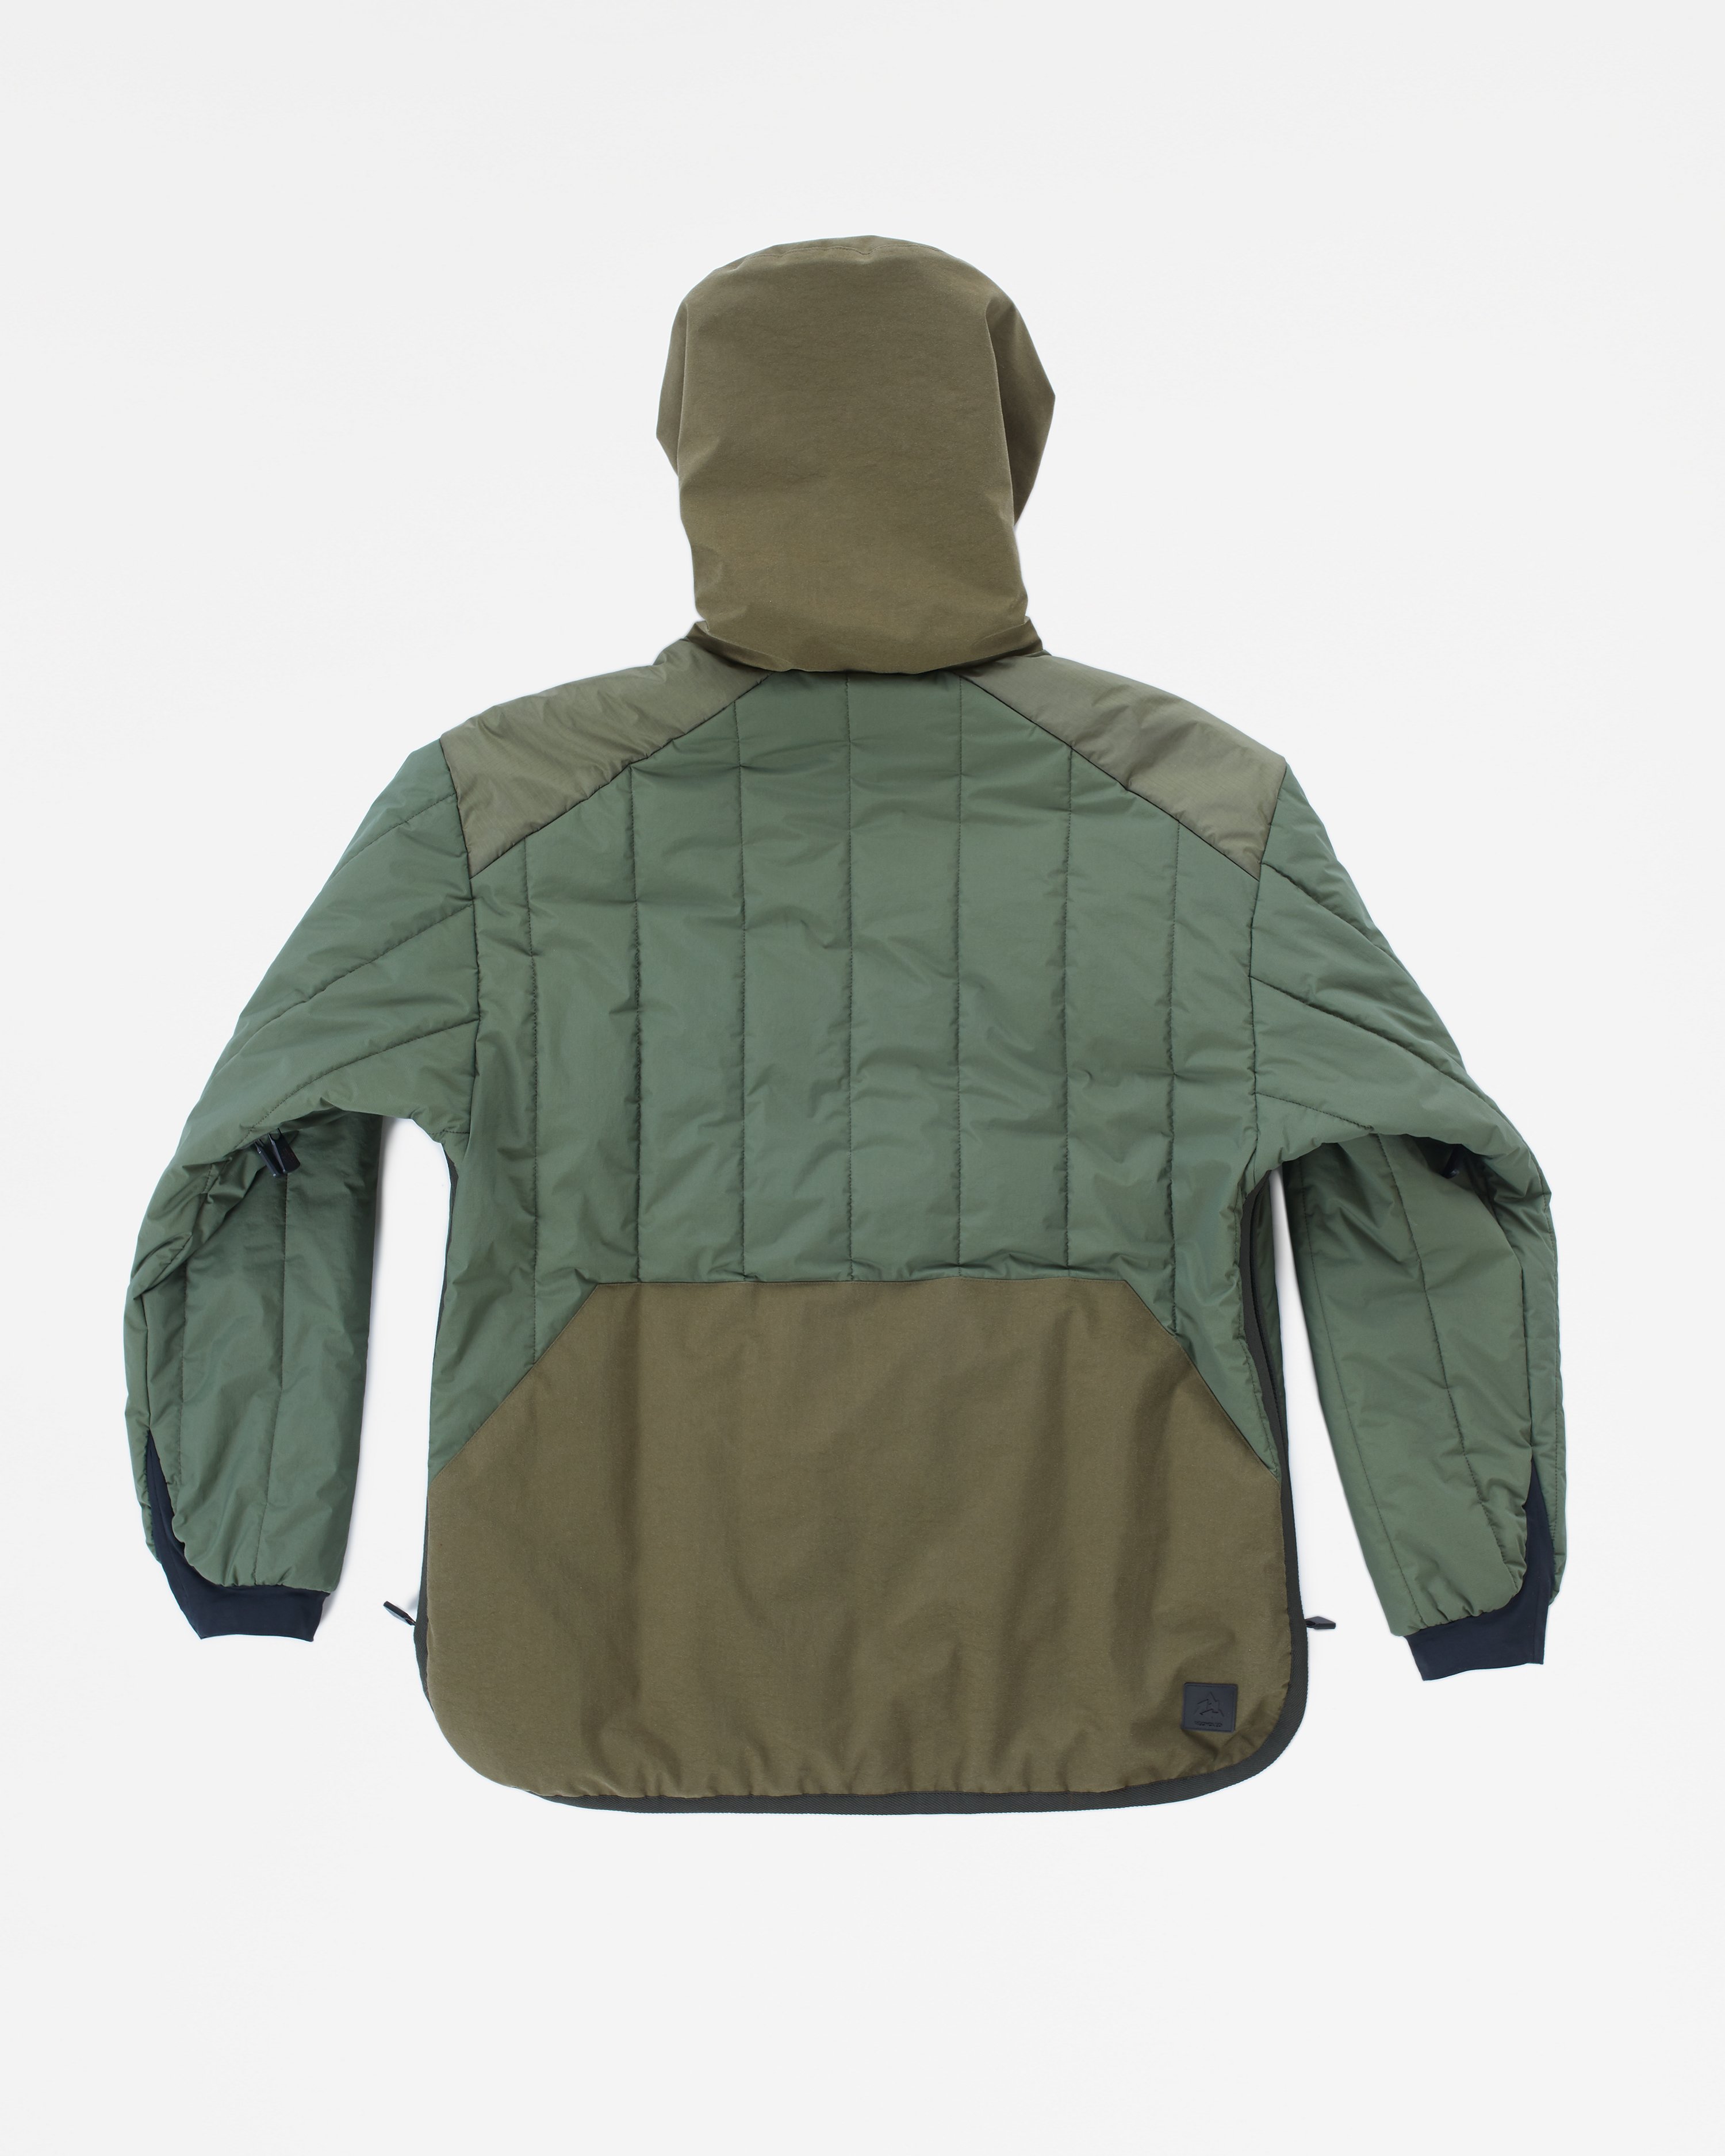 Moncler Genius - Recycled Indren Jacket - Clothing - Green - Image 2